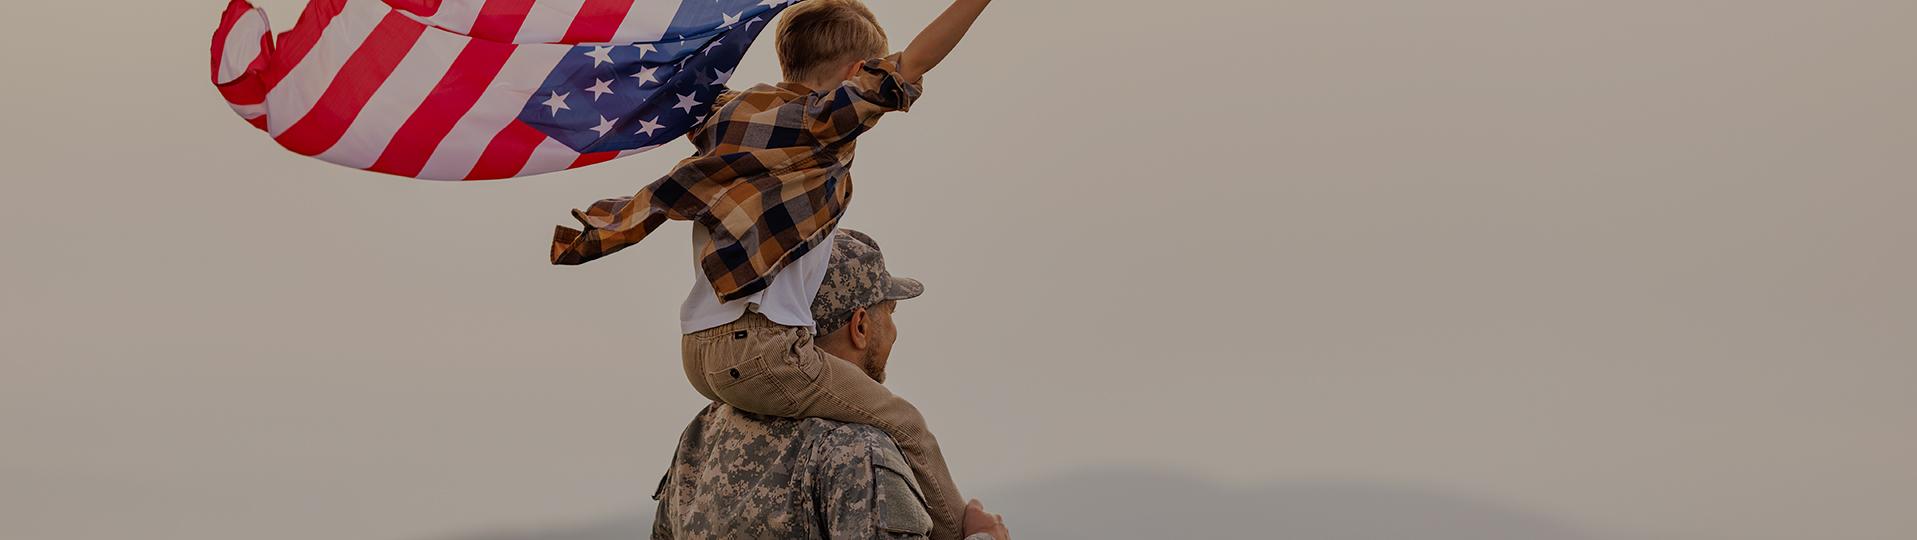 A soldier proudly holds his son on his shoulders, the child waving an American flag, symbolizing the hope of military parole in place for their family.